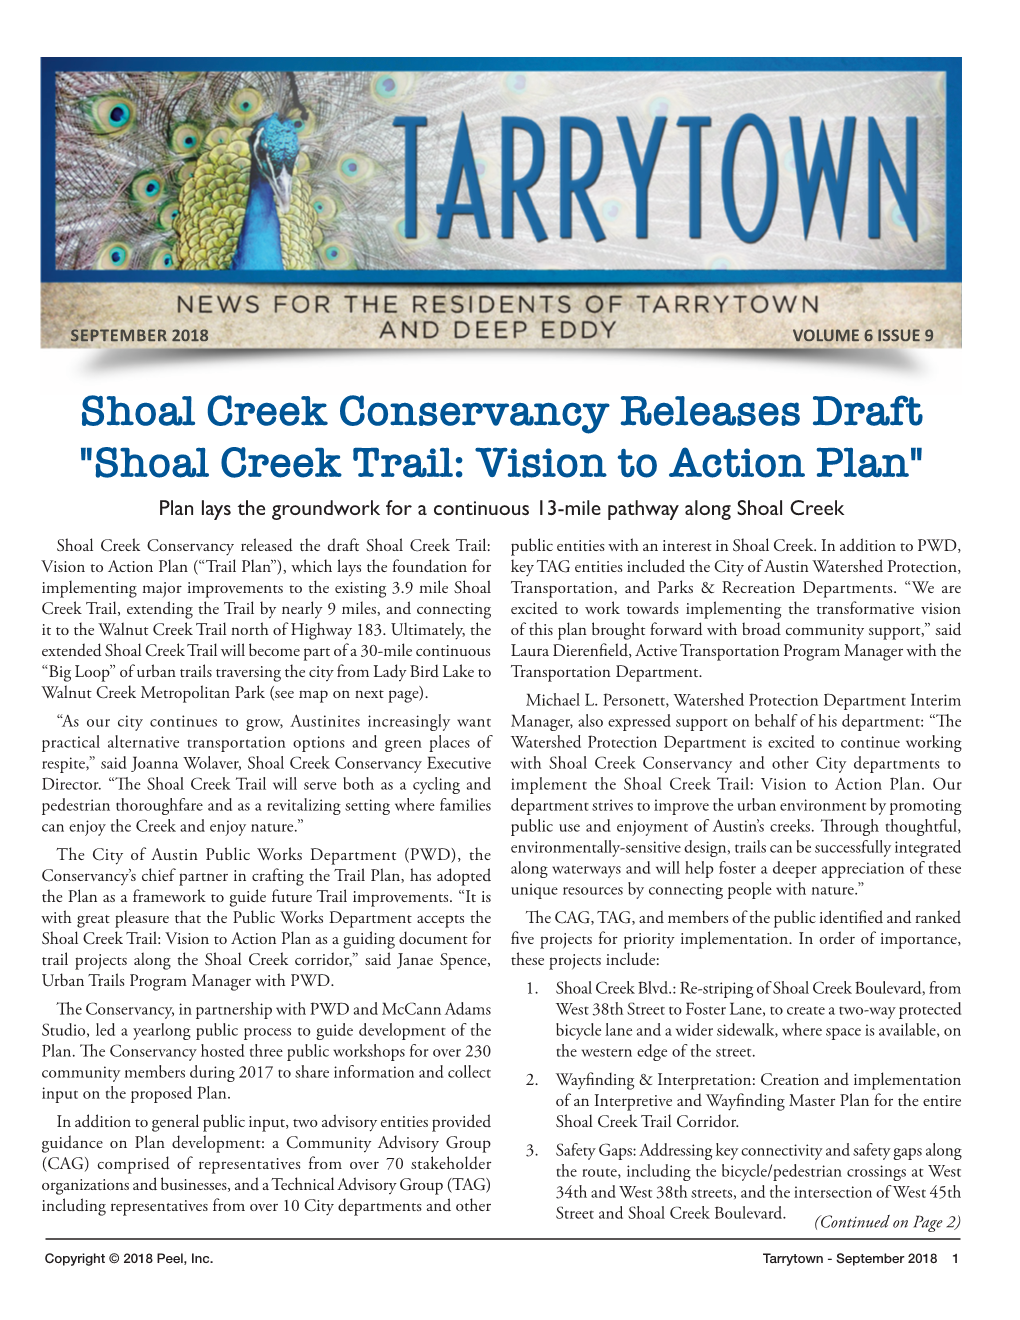 Shoal Creek Conservancy Releases Draft "Shoal Creek Trail: Vision to Action Plan" Plan Lays the Groundwork for a Continuous 13-Mile Pathway Along Shoal Creek